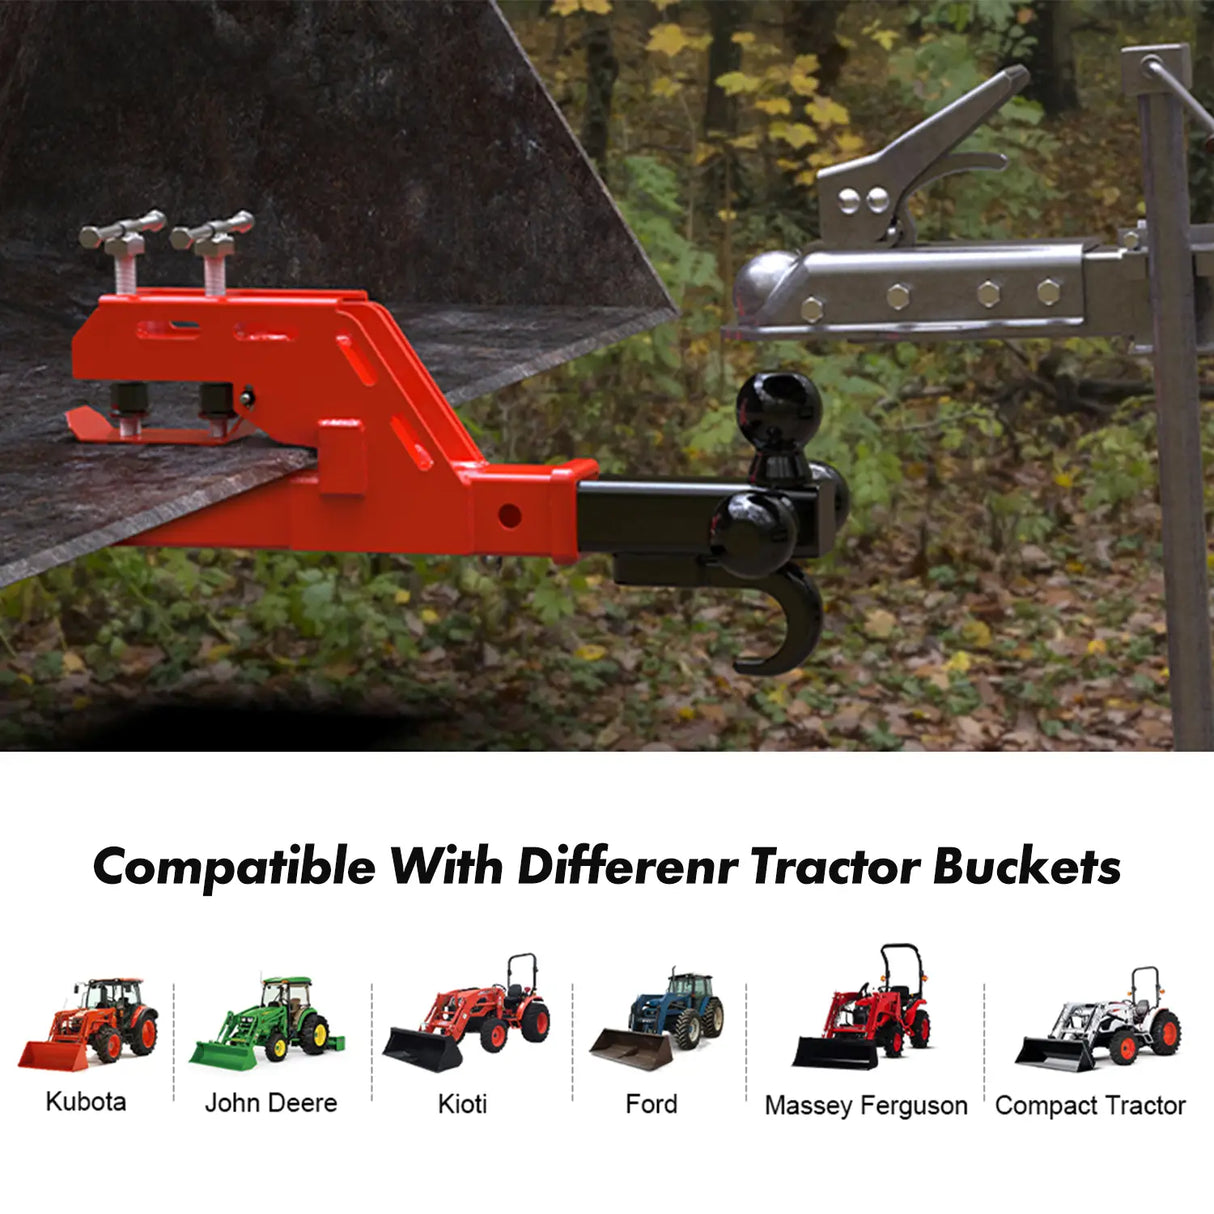 Upgraded Tractor Clamp on Trailer Hitch, Clamp-on Tractor Bucket Hitch 2" Ball Mount Receiver Adapter for Kubota Tractor Bucket, Red Bucket Trailer Hitch Attachment Accessories